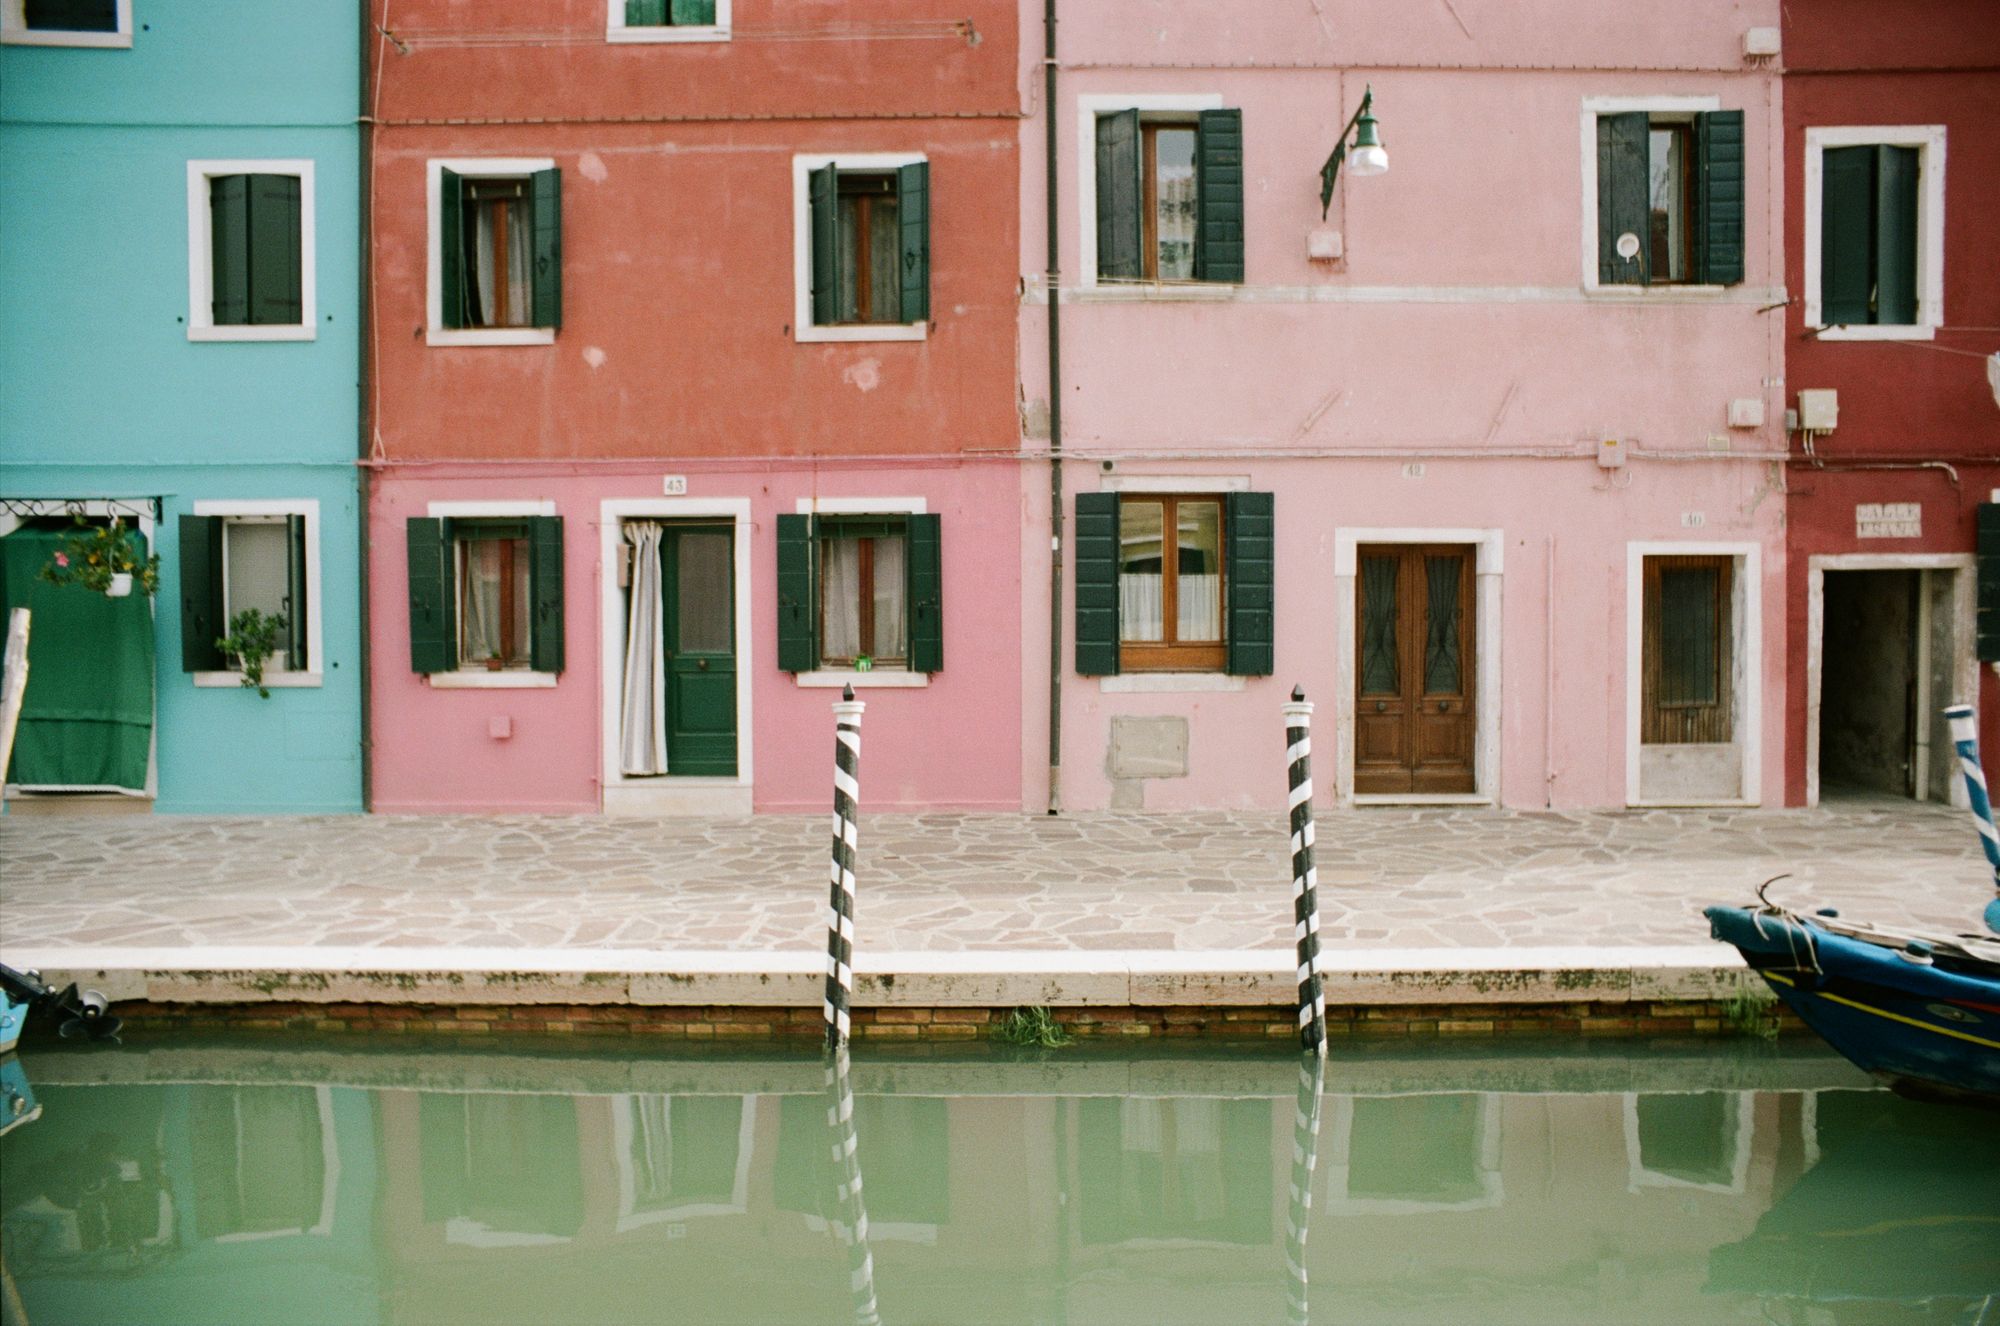 A row of colourful terraced houses (sky blue, dark pink, pale link, burgundy) with green window shutters open out onto a canal towpath with light-coloured crazy paving. The canal itself is aquamarine, reflecting the houses, and two black-and-white spiral-striped mooring posts. A small blue boat's prow sticks into the frame from the right.